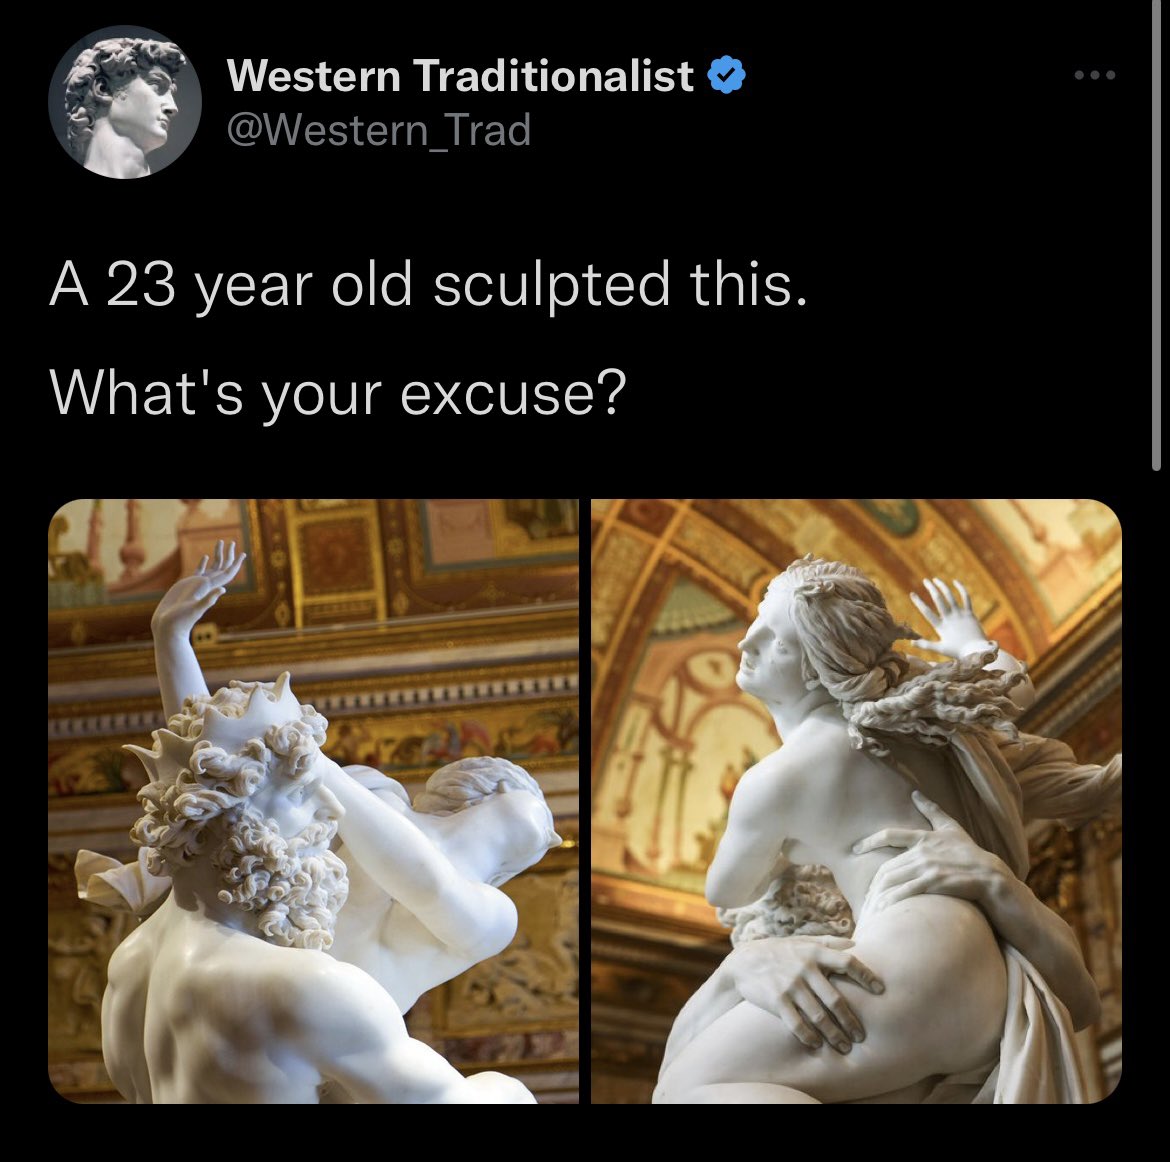 Ever since I was told these good-old-days, Western fetishization Twitters with marble profile photos were fashy accounts meant to onboard people into white supremacy through “aesthetics,” I haven’t been able to unsee it.